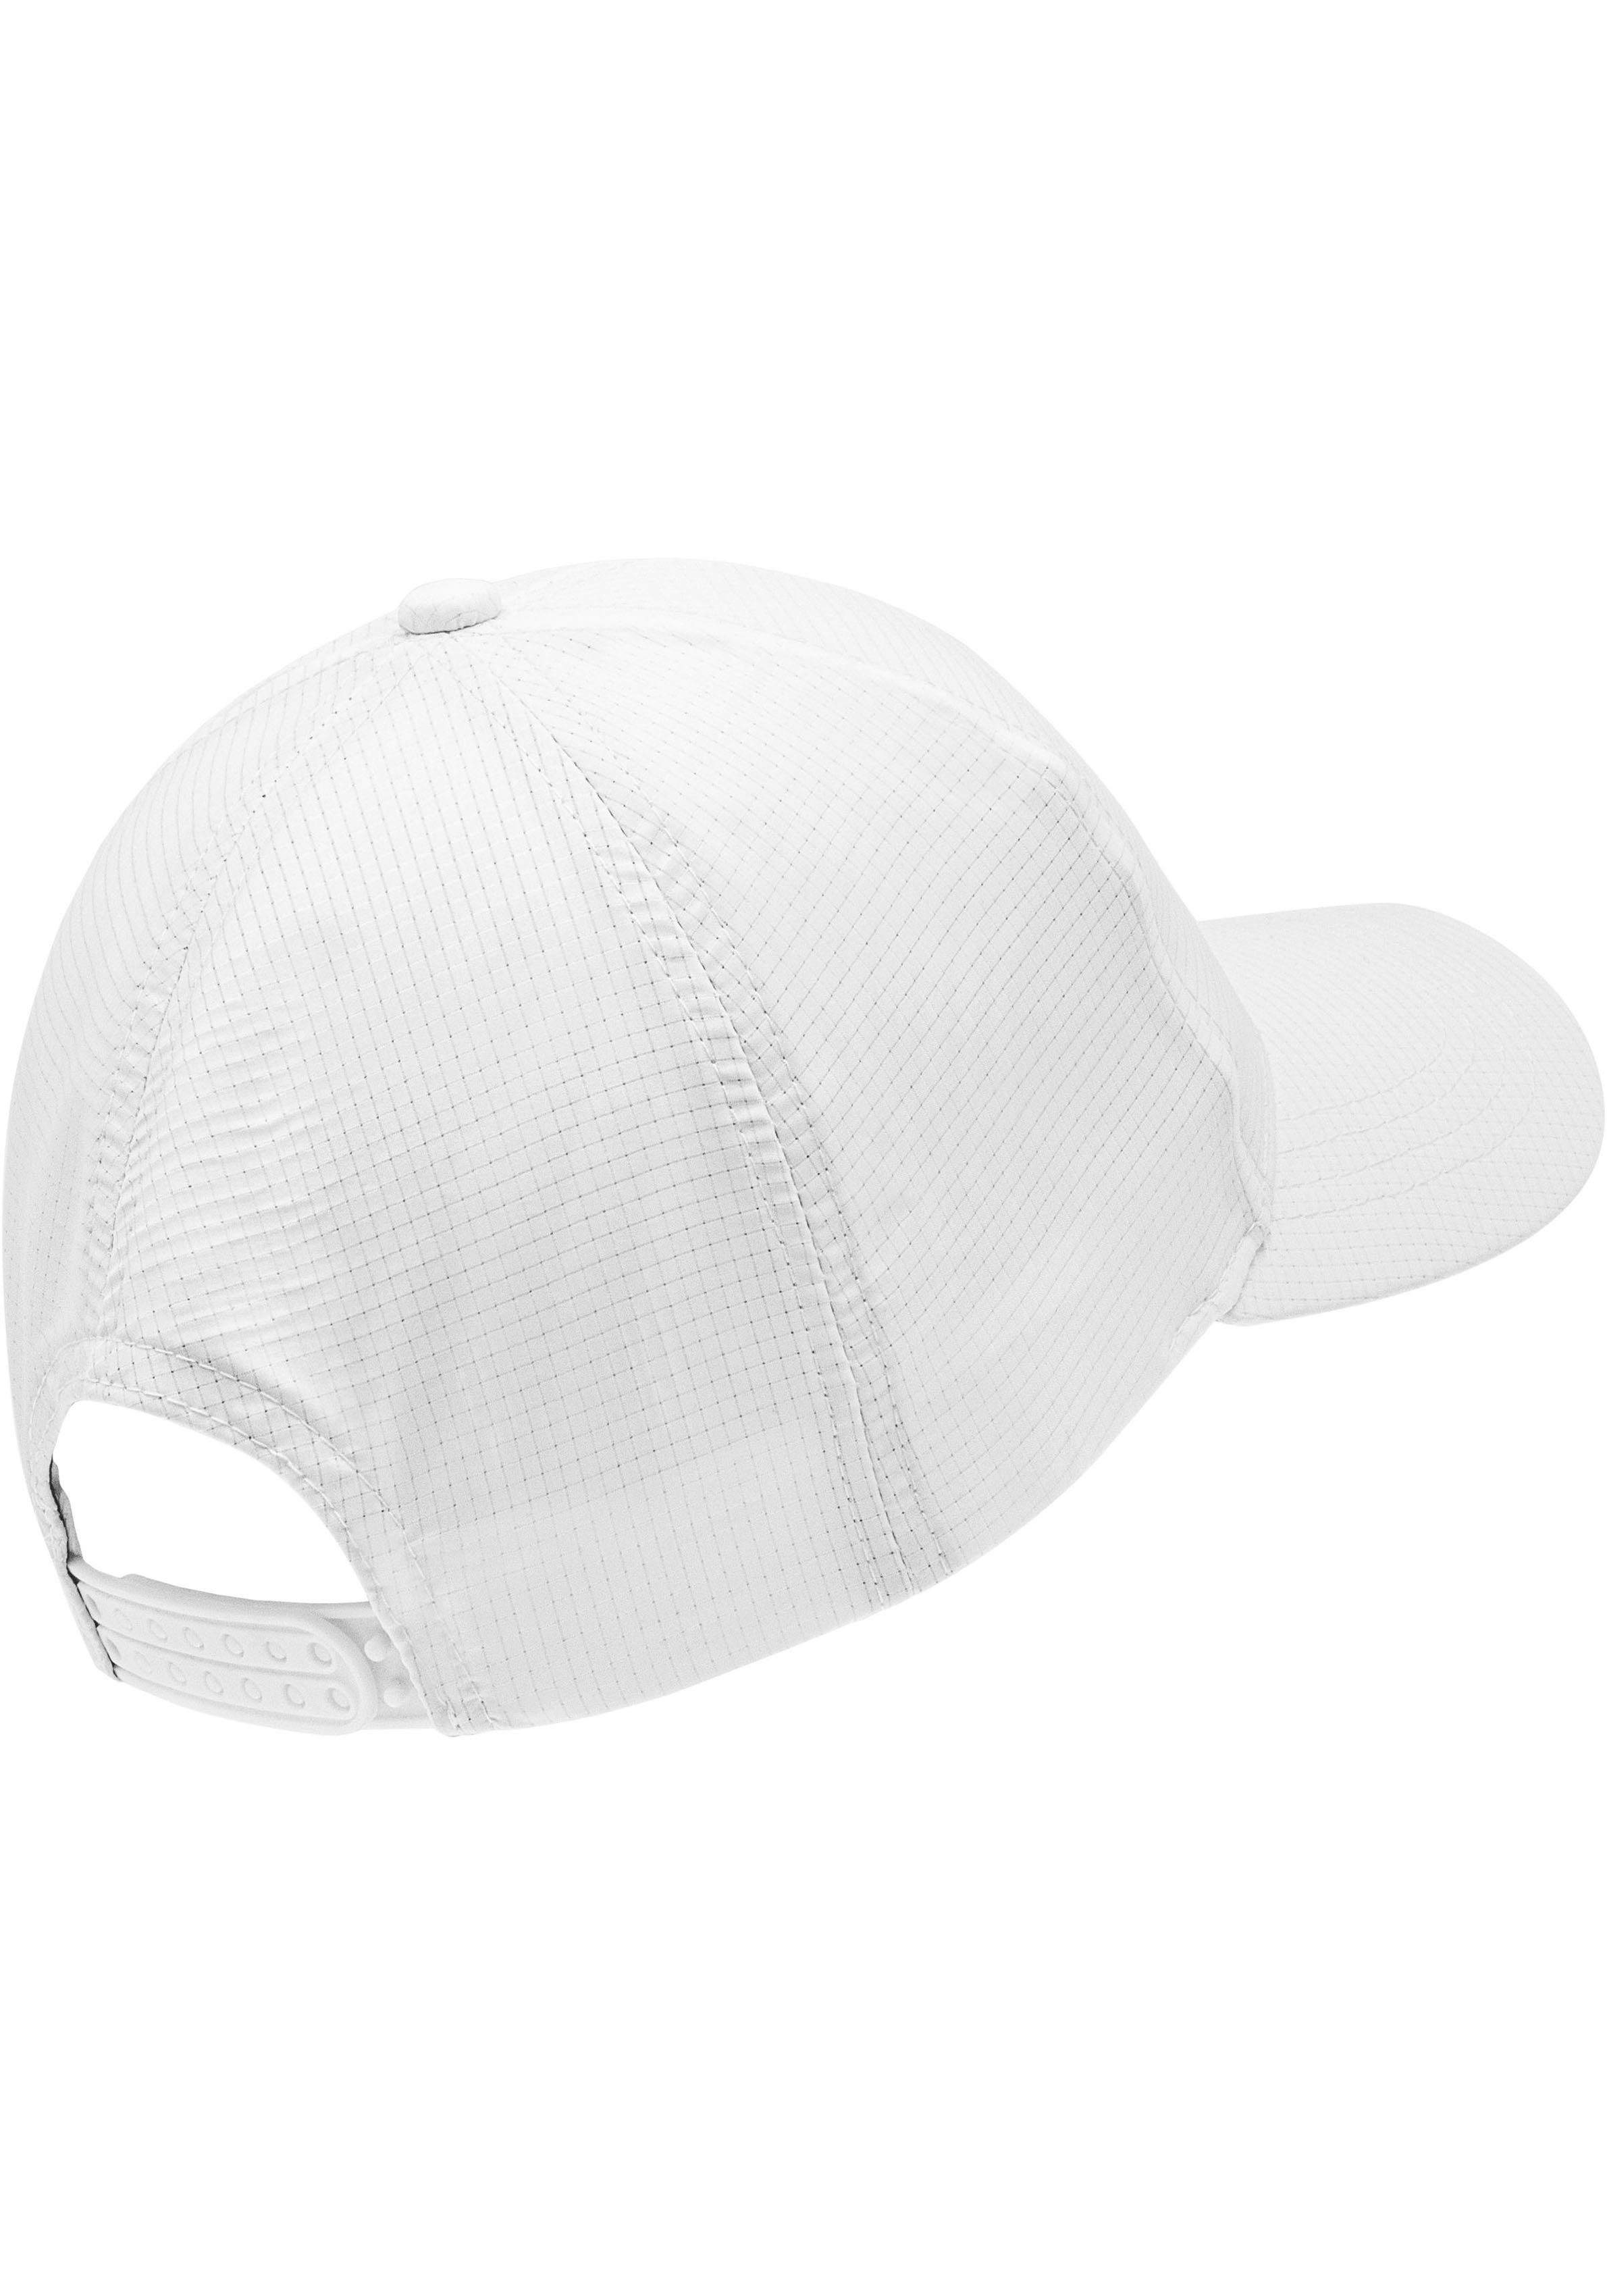 Baseball Hat Cap weiß Langley chillouts